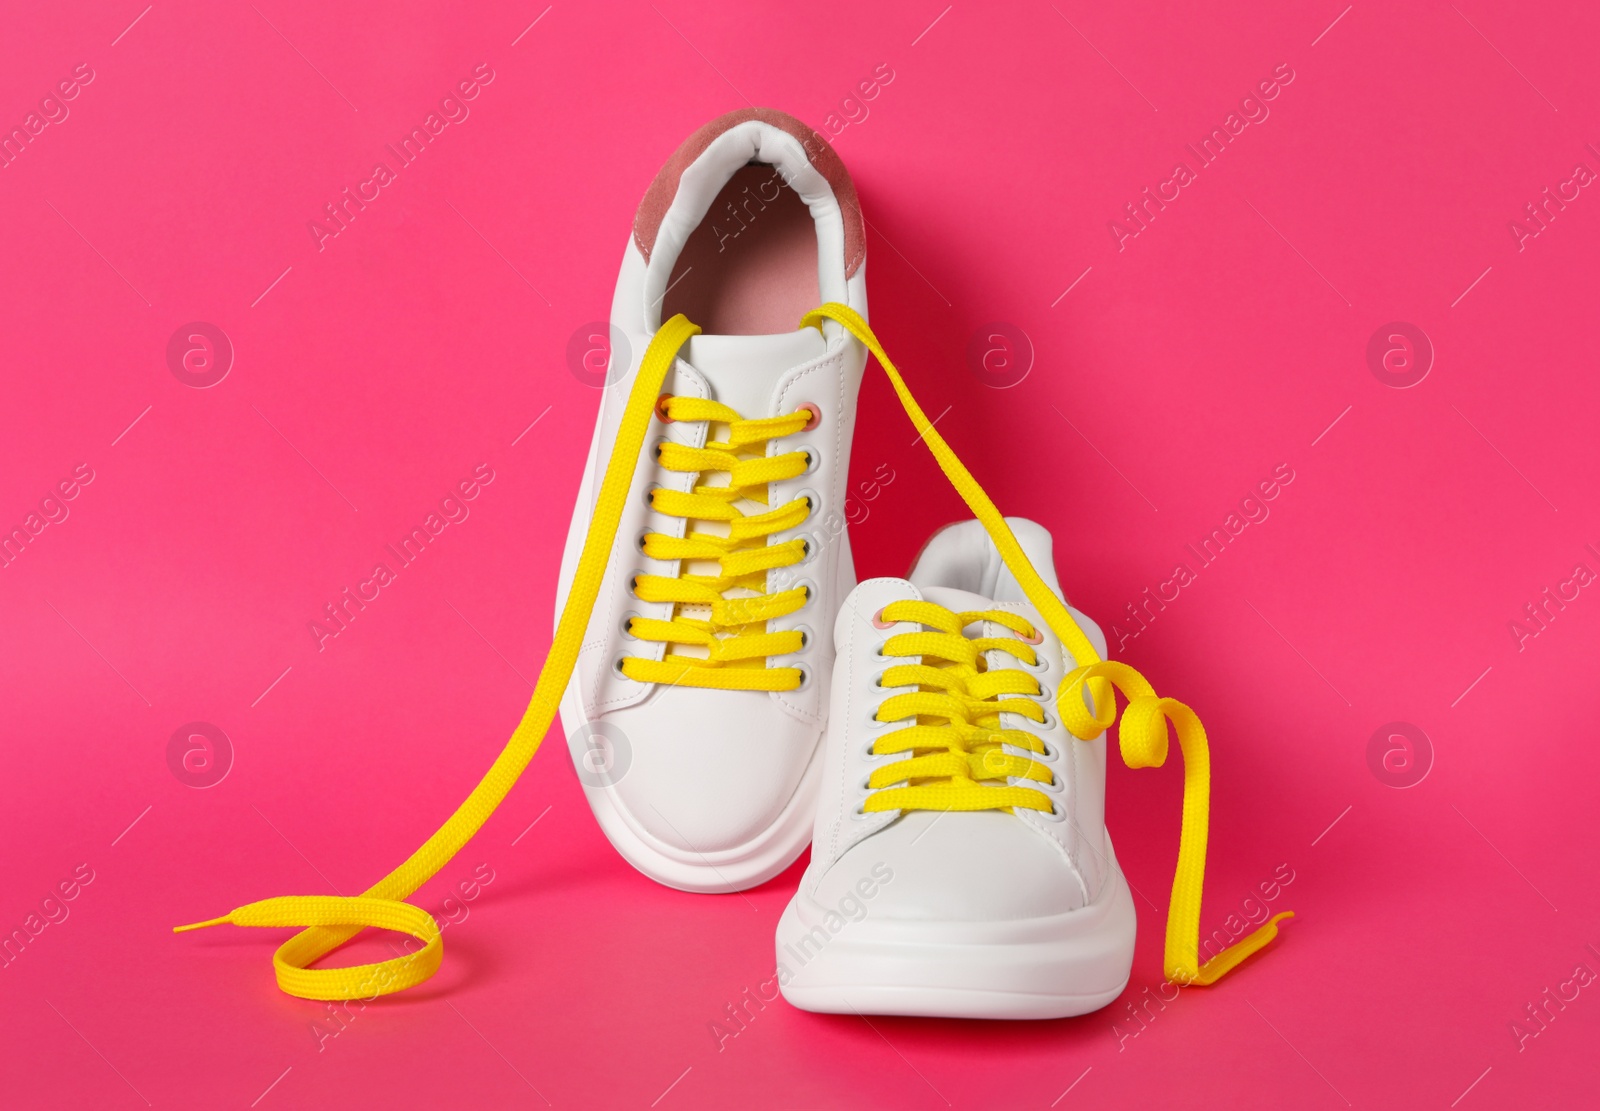 Photo of Pair of stylish shoes with yellow laces on pink background